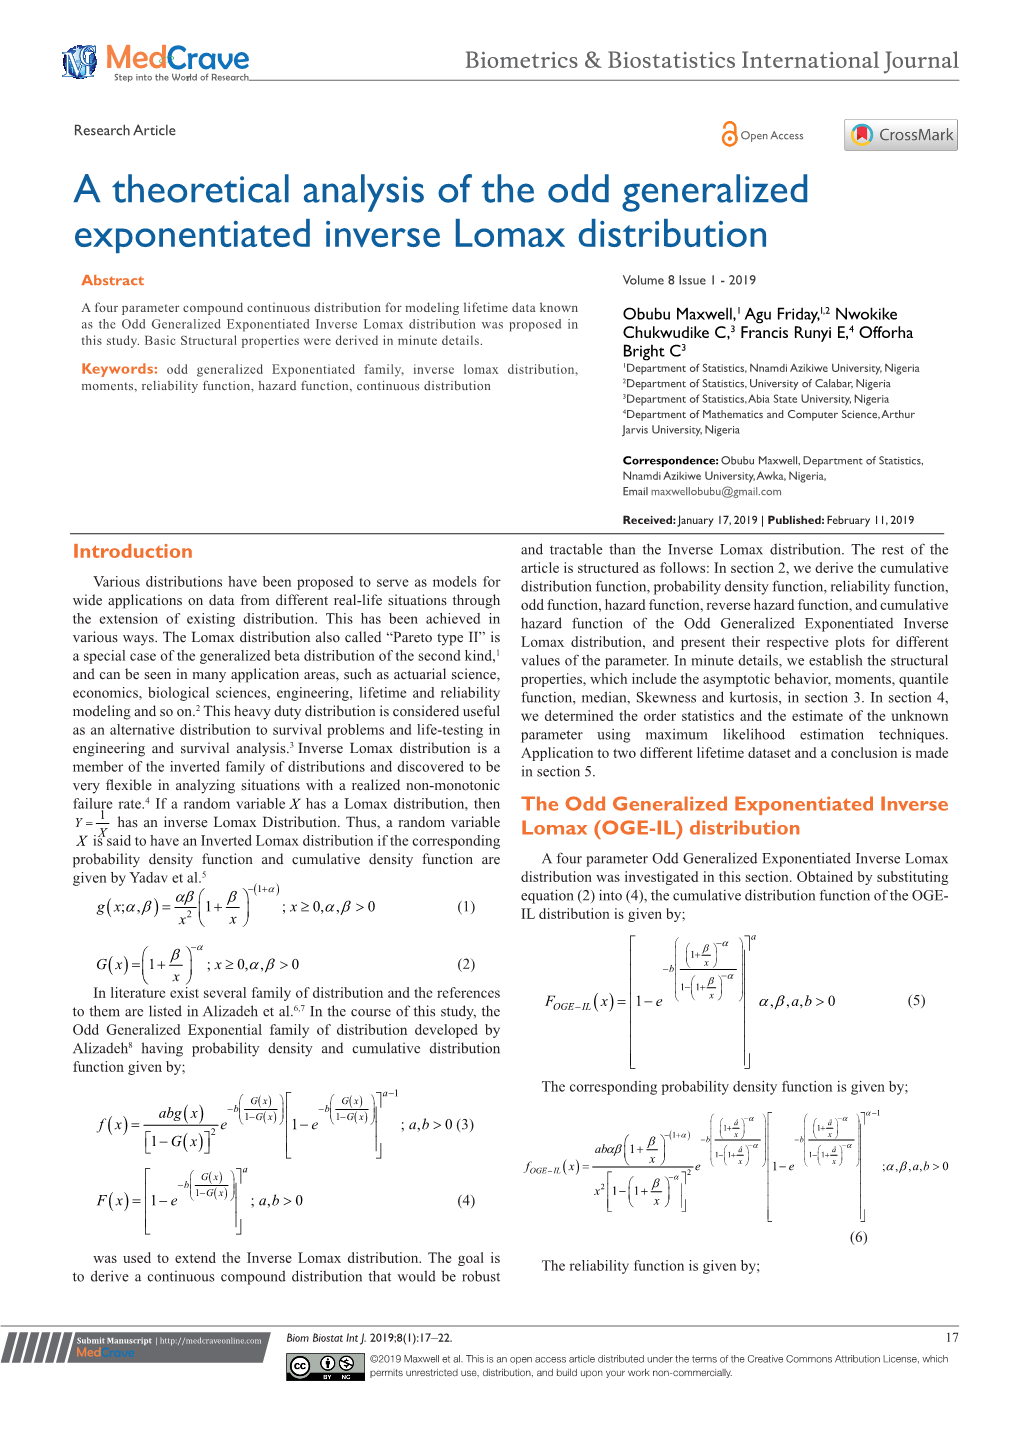 A Theoretical Analysis of the Odd Generalized Exponentiated Inverse Lomax Distribution